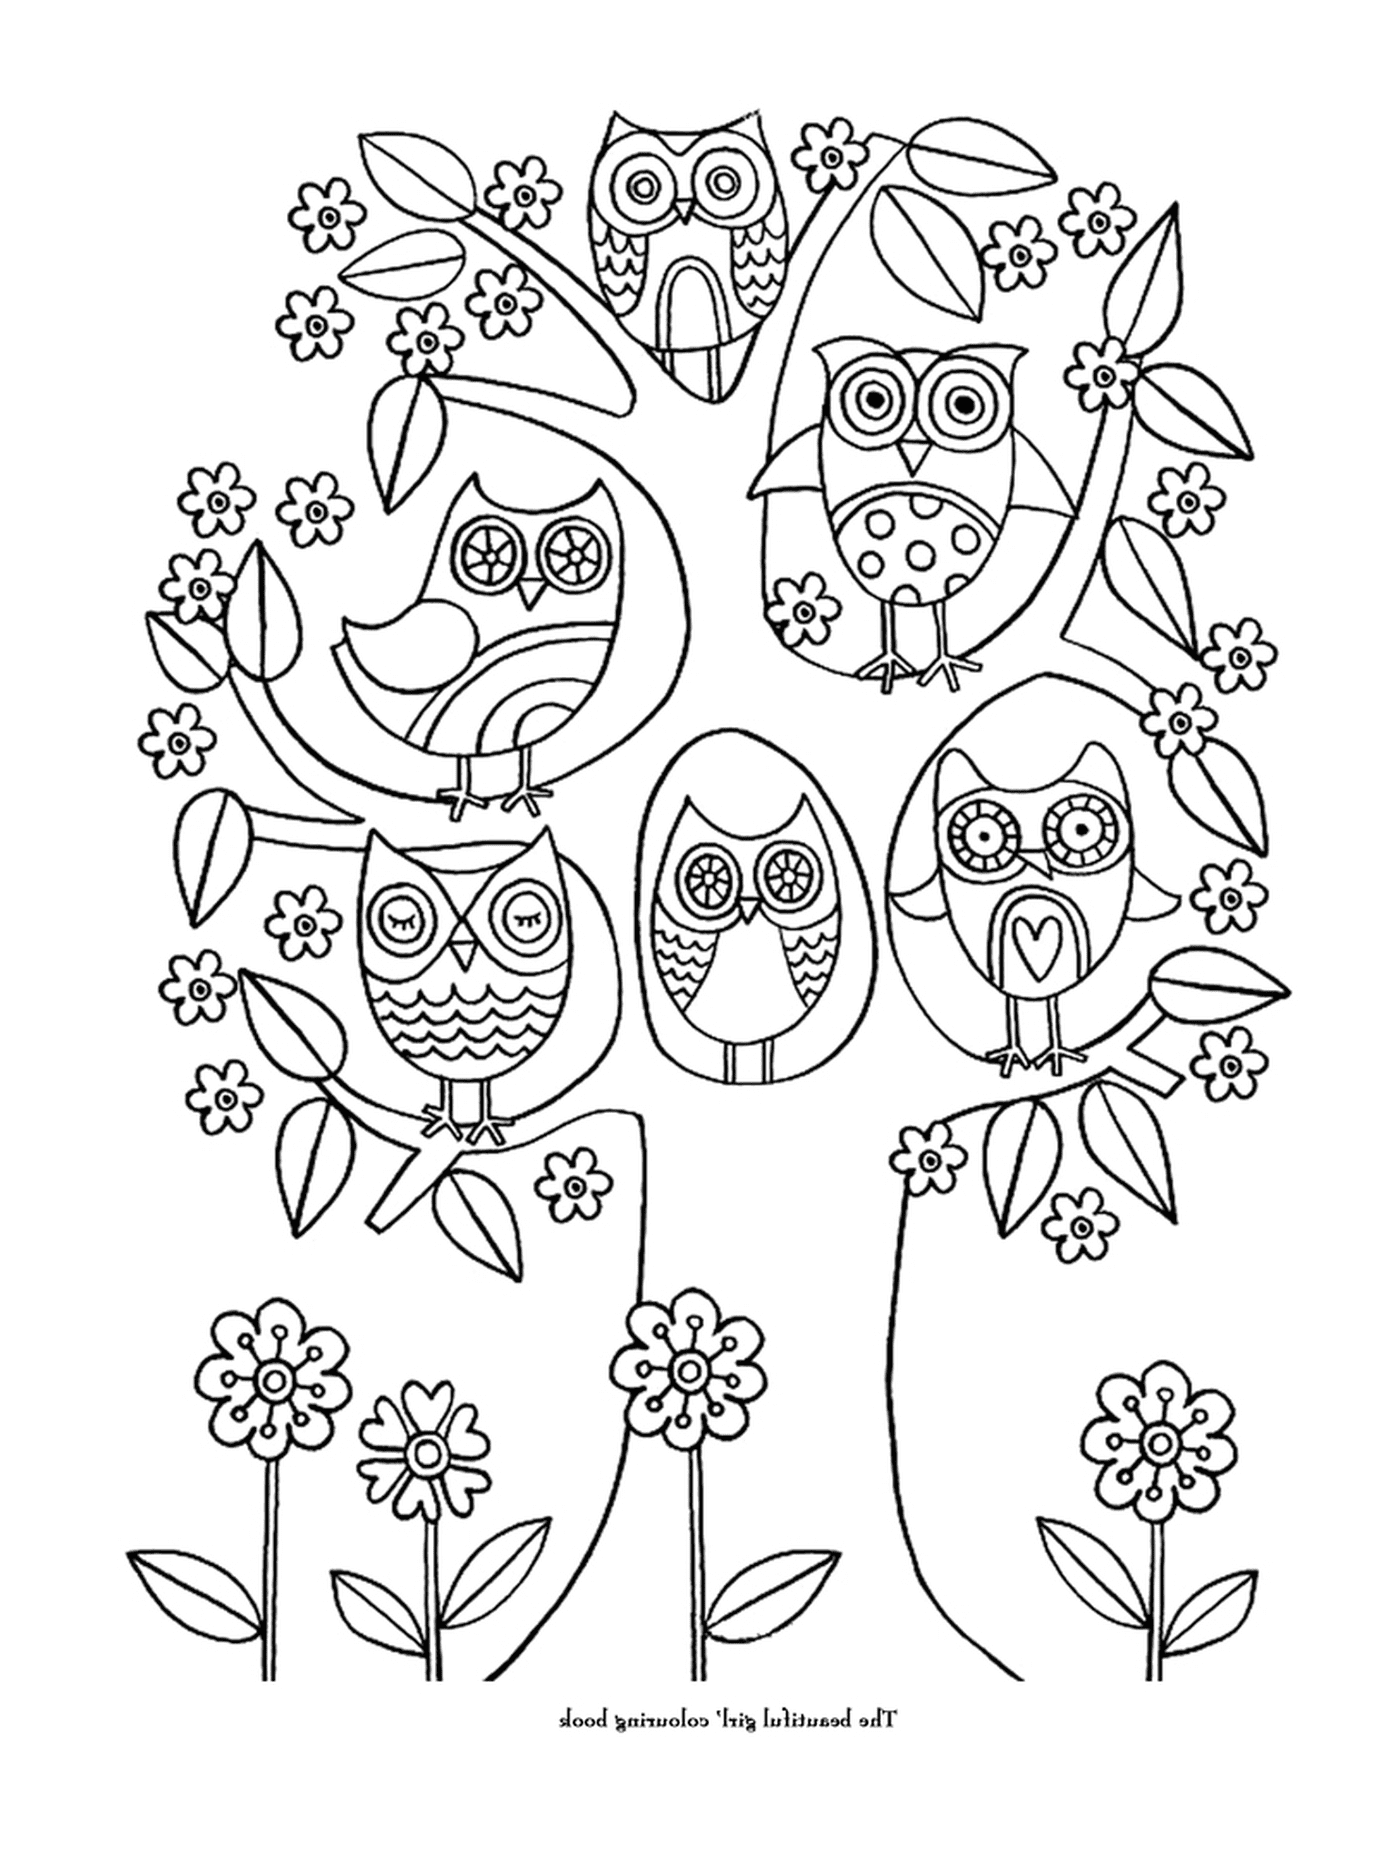  A group of owls on a tree branch 